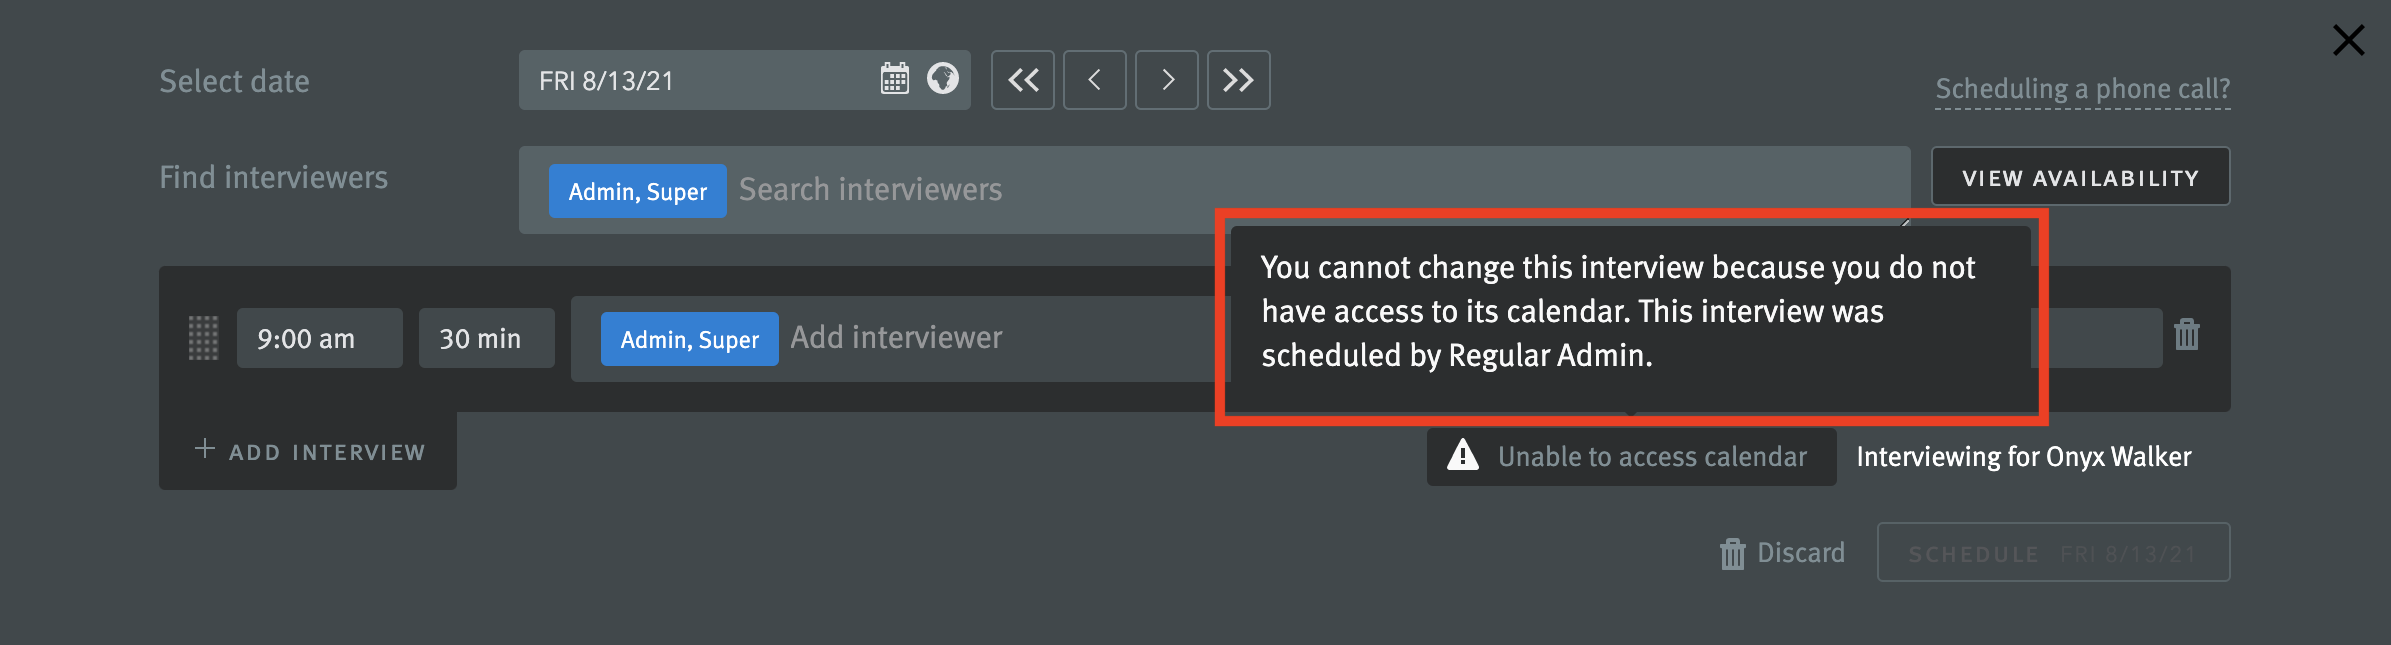 Scheduling window with modal indicating the user does not have access to the calendar on which they are attempting to reschedule the interview.